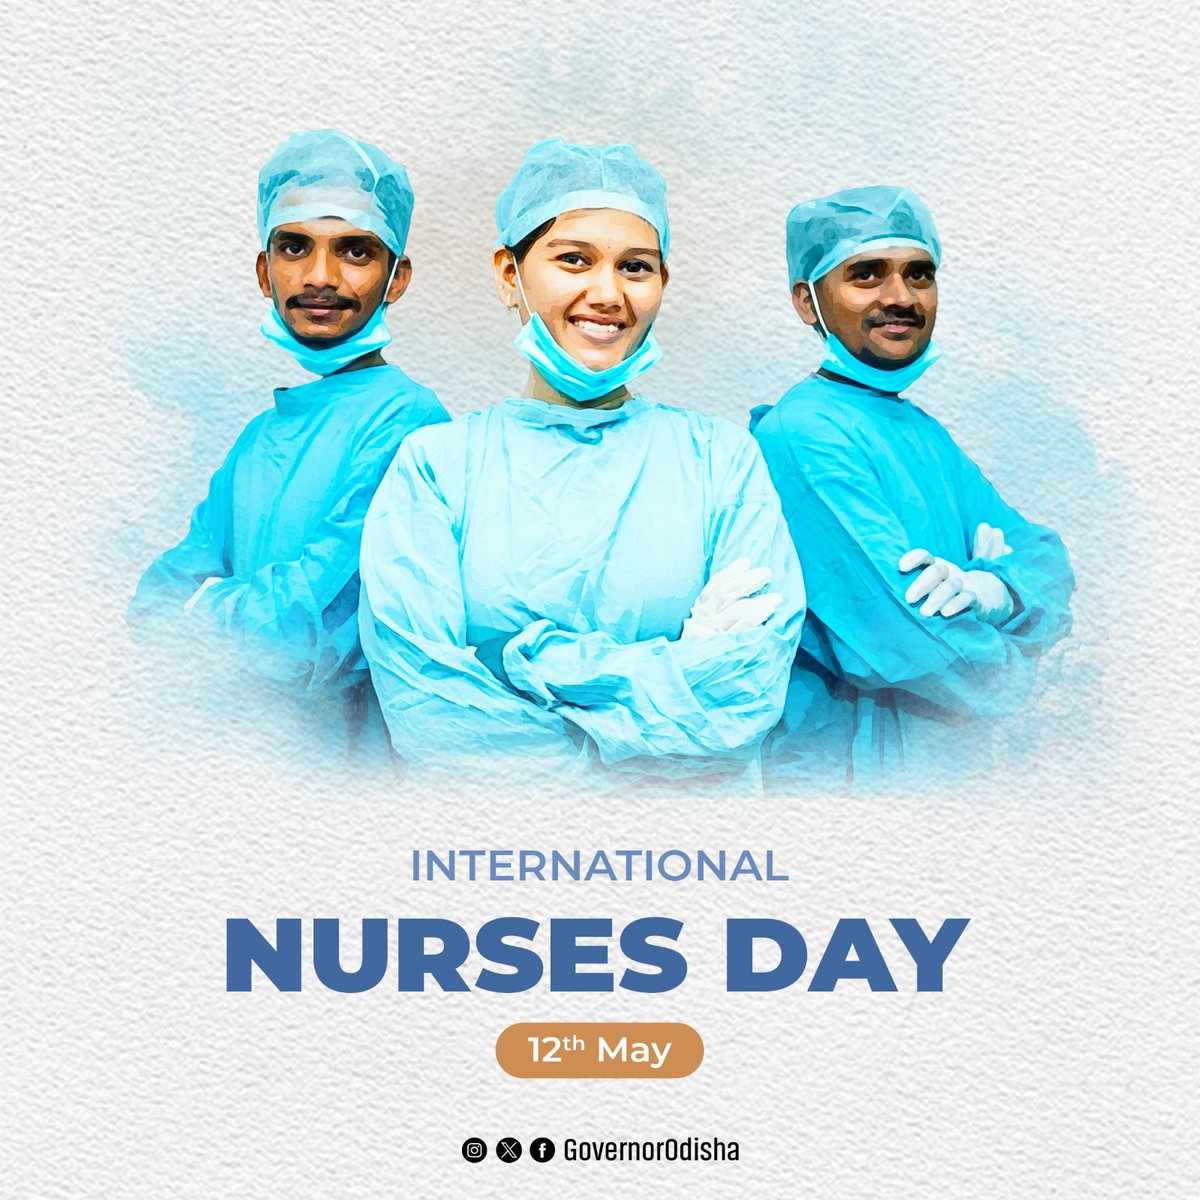 On this #NursesDay, let's take a moment to recognize and thank the nurses who work tirelessly to improve the lives of their patients every day. Your compassion, empathy, and skill make a world of difference in the lives of so #NursesDay2024